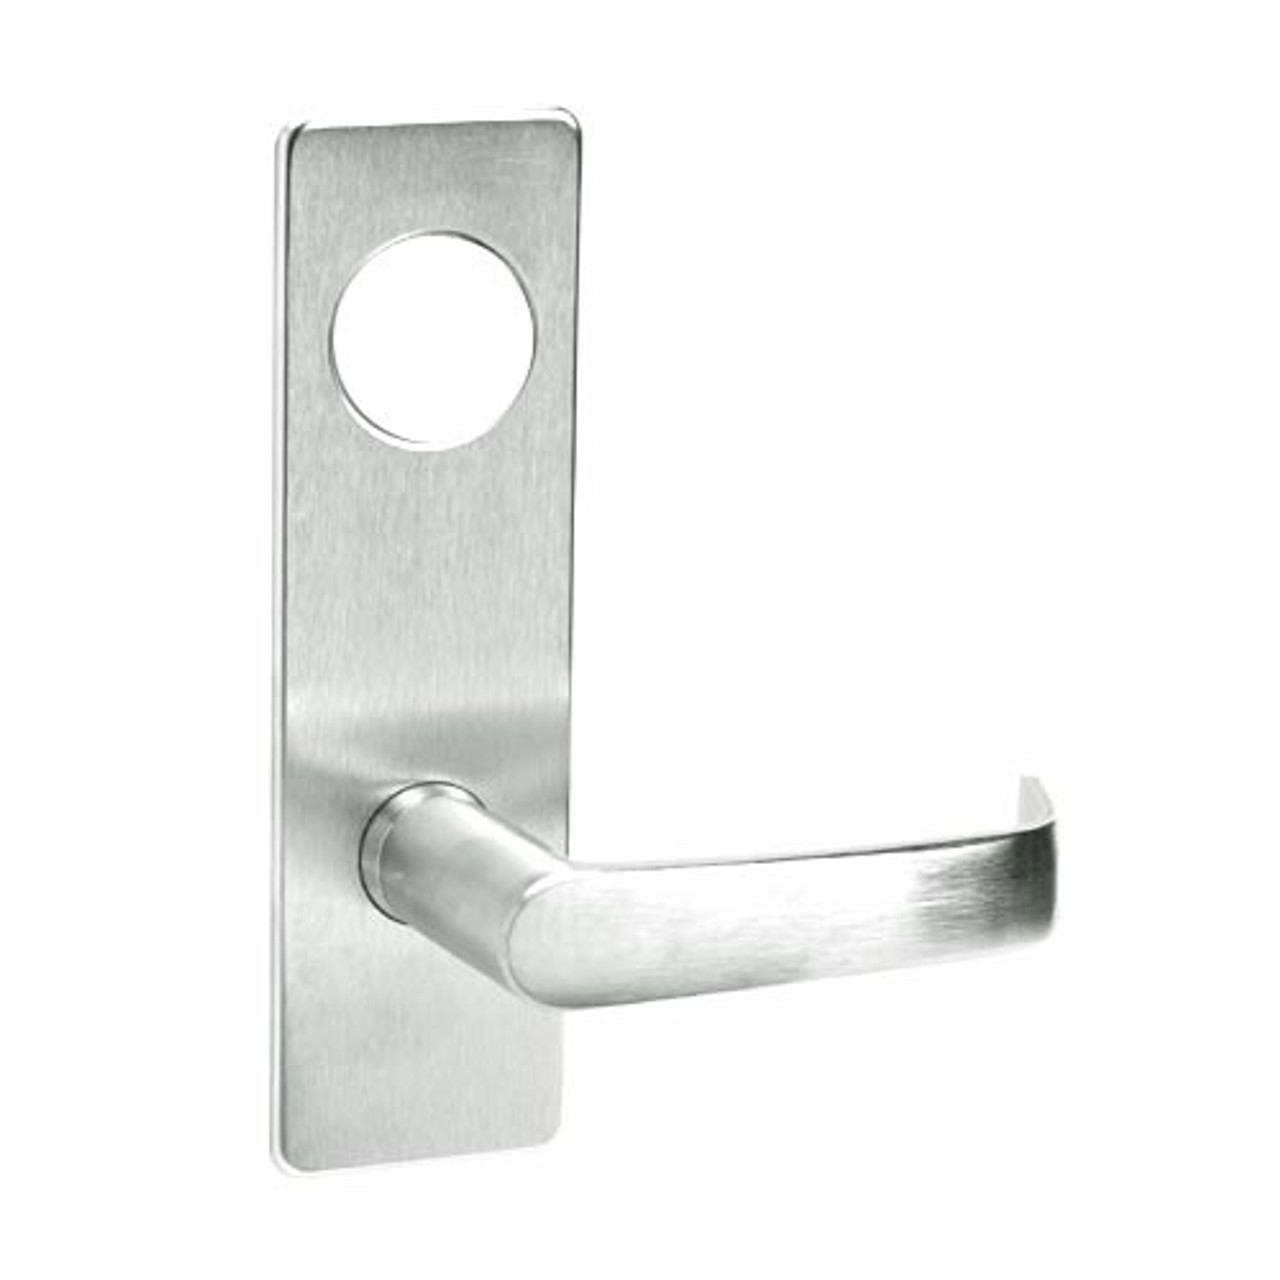 ML2048-NSP-618-M31 Corbin Russwin ML2000 Series Mortise Entrance Trim Pack with Newport Lever in Bright Nickel